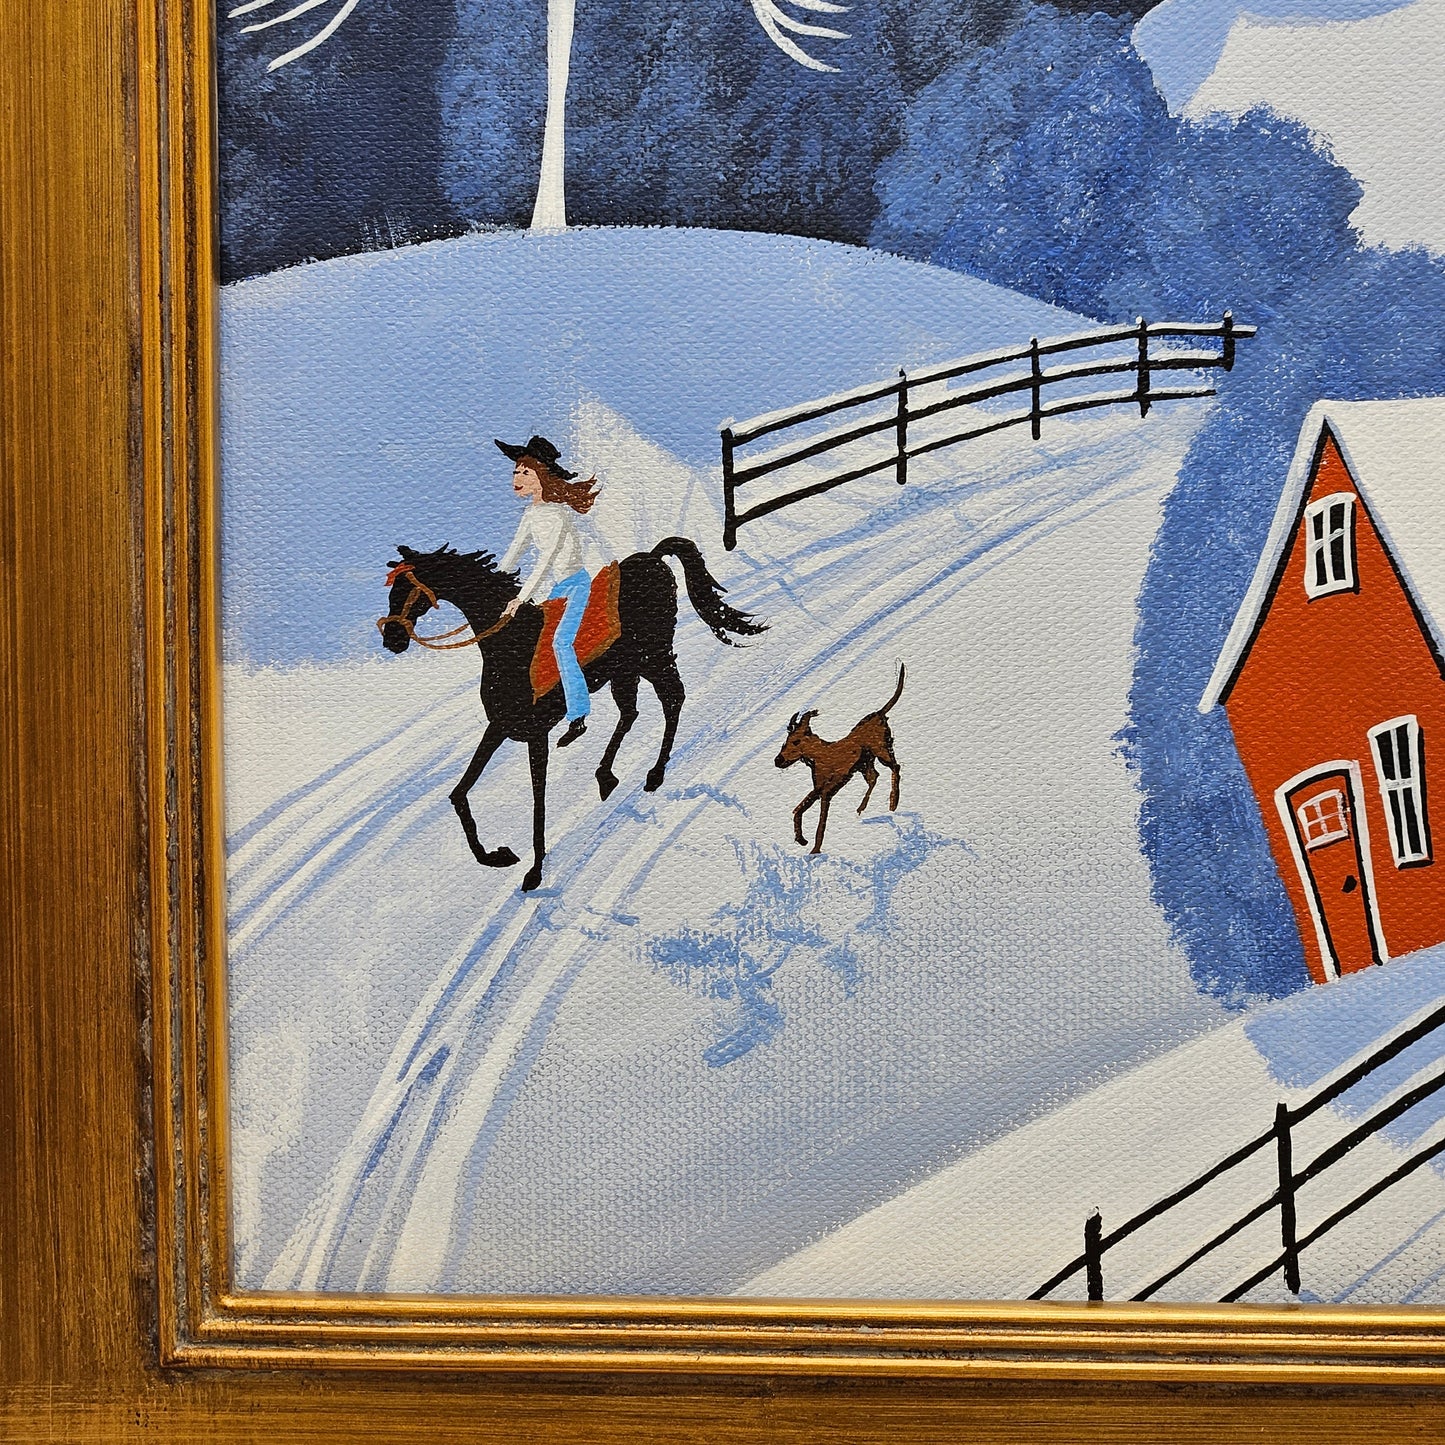 Wonderful Oil on Canvas Painting by Debbie Criswell of a Winter Scene with Horse & Dog